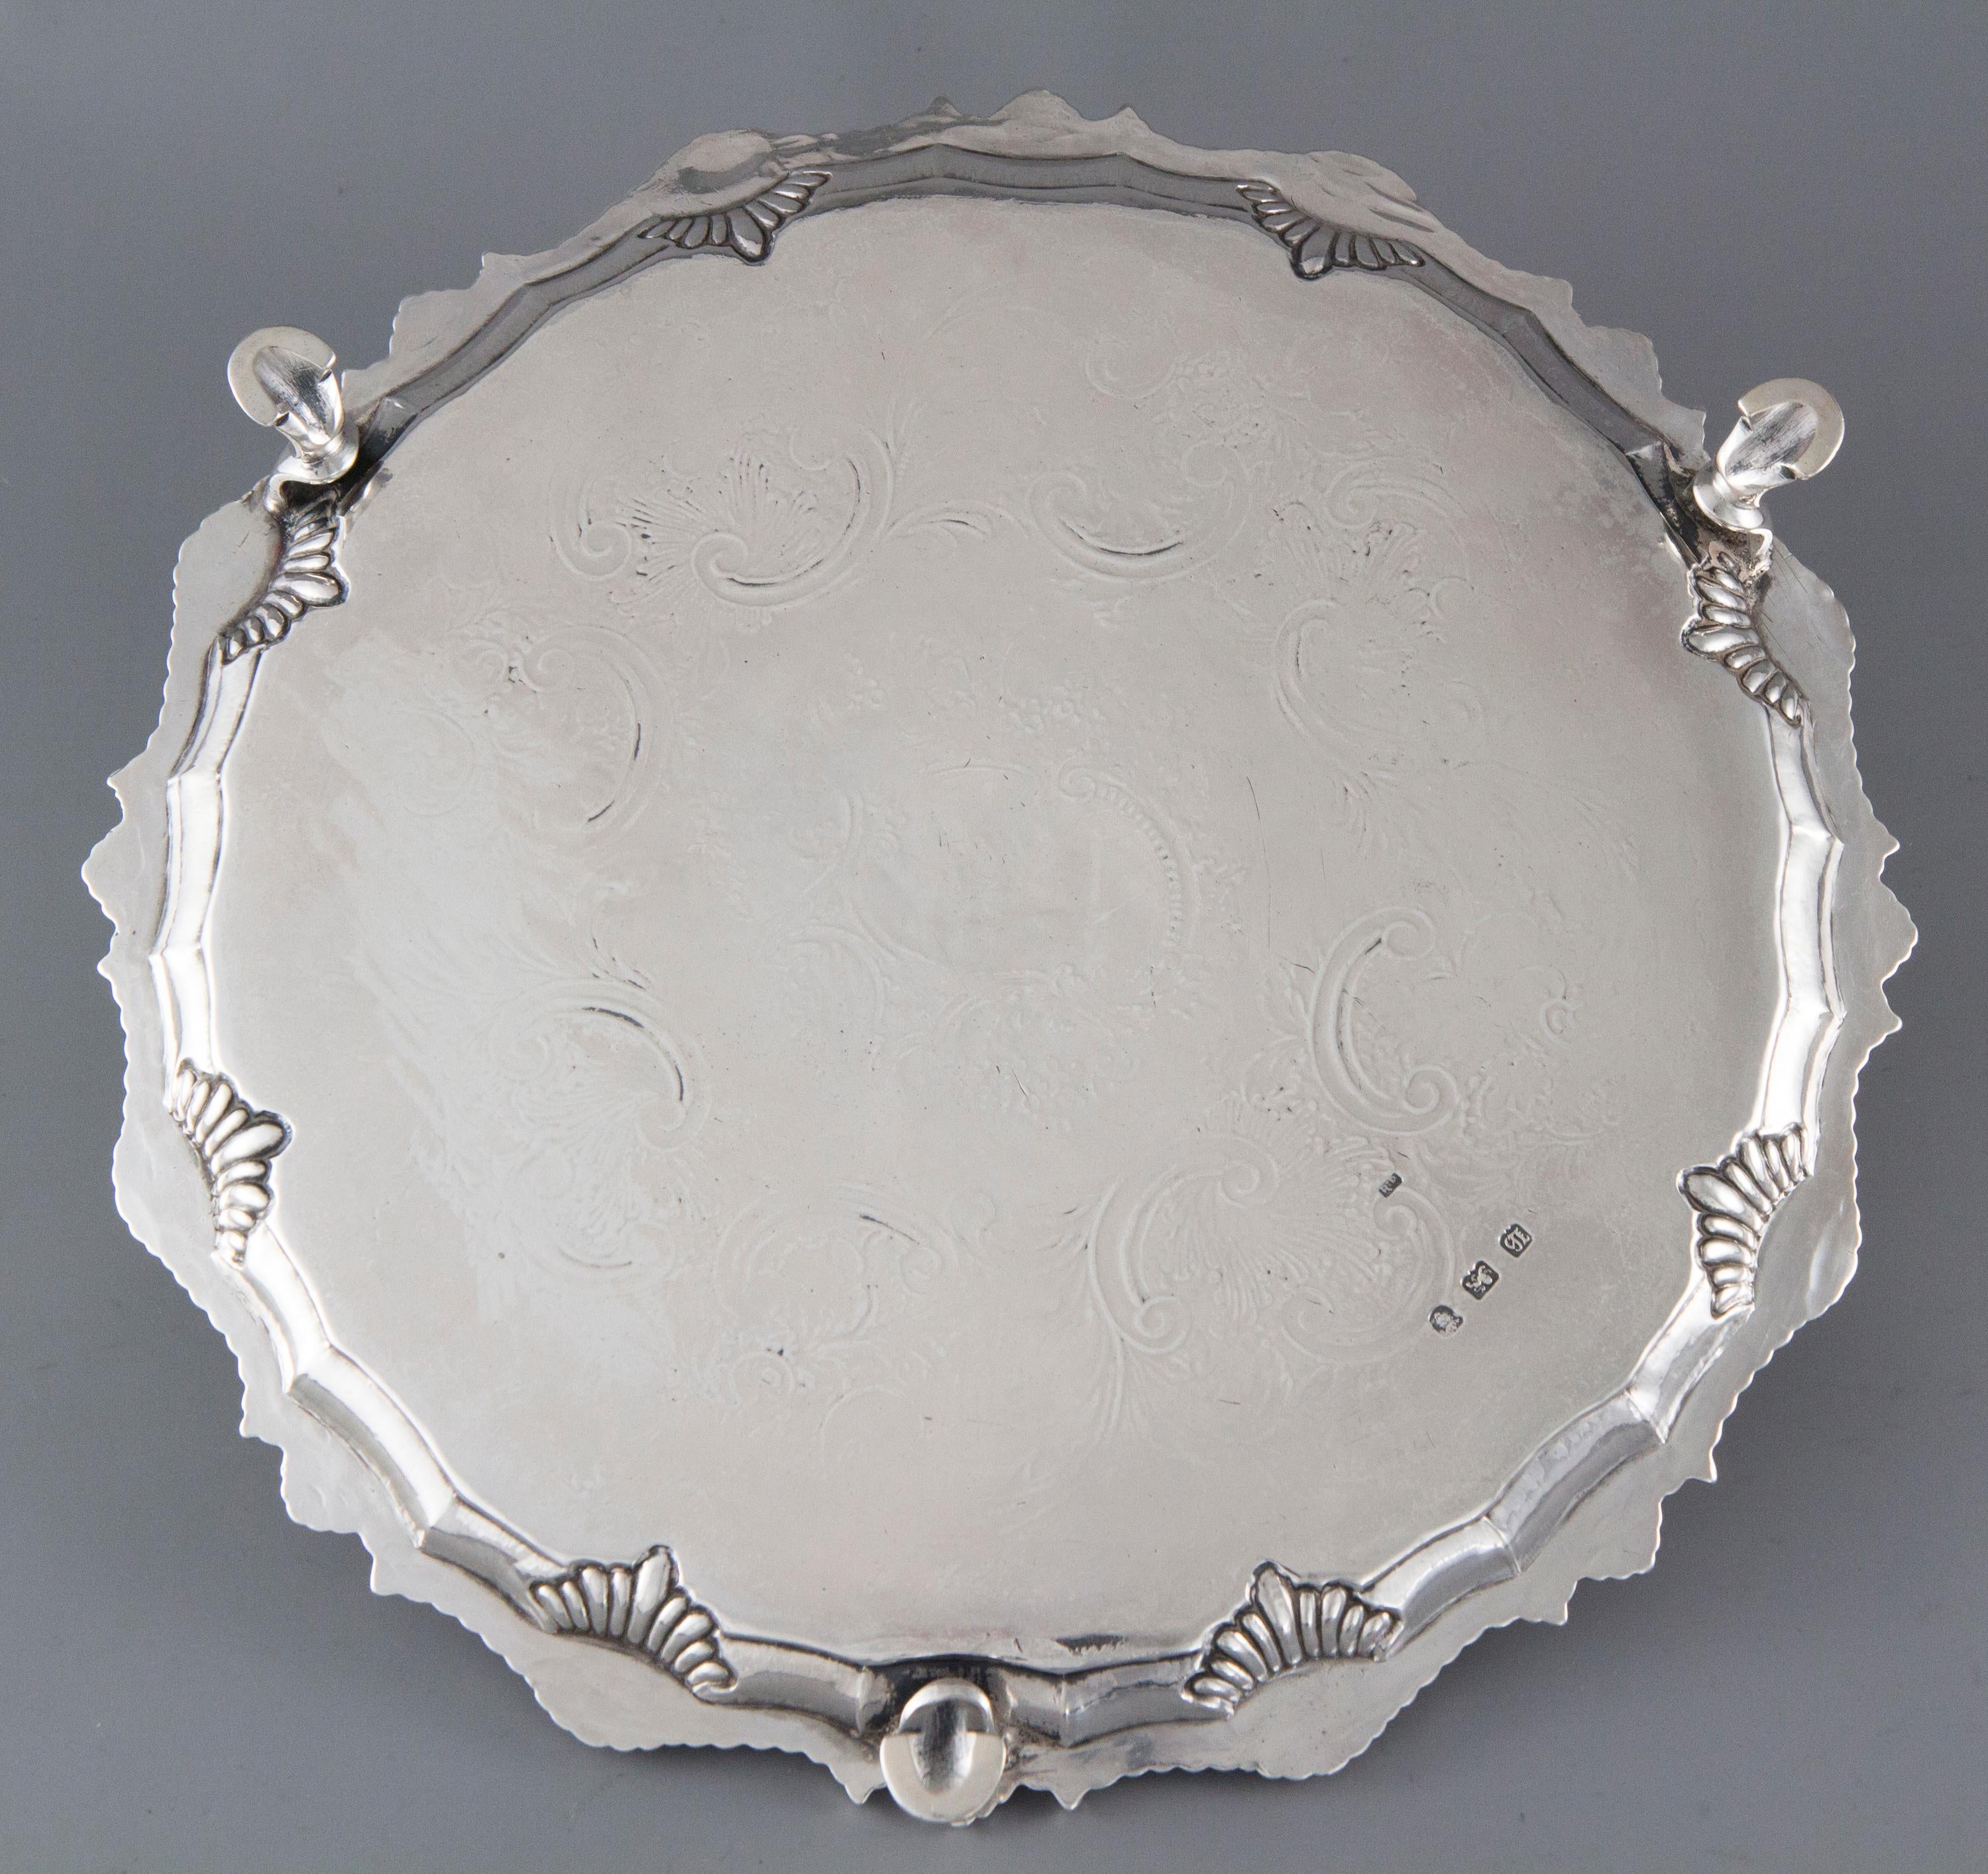 A very good quality silver salver of circular form. The plate engraved with floral and foliate arabesques about a vacant shaped cartouche. The cast rim of fluted shell form decoration. The whole standing on three cast C-scroll hoof feet.

Clearly